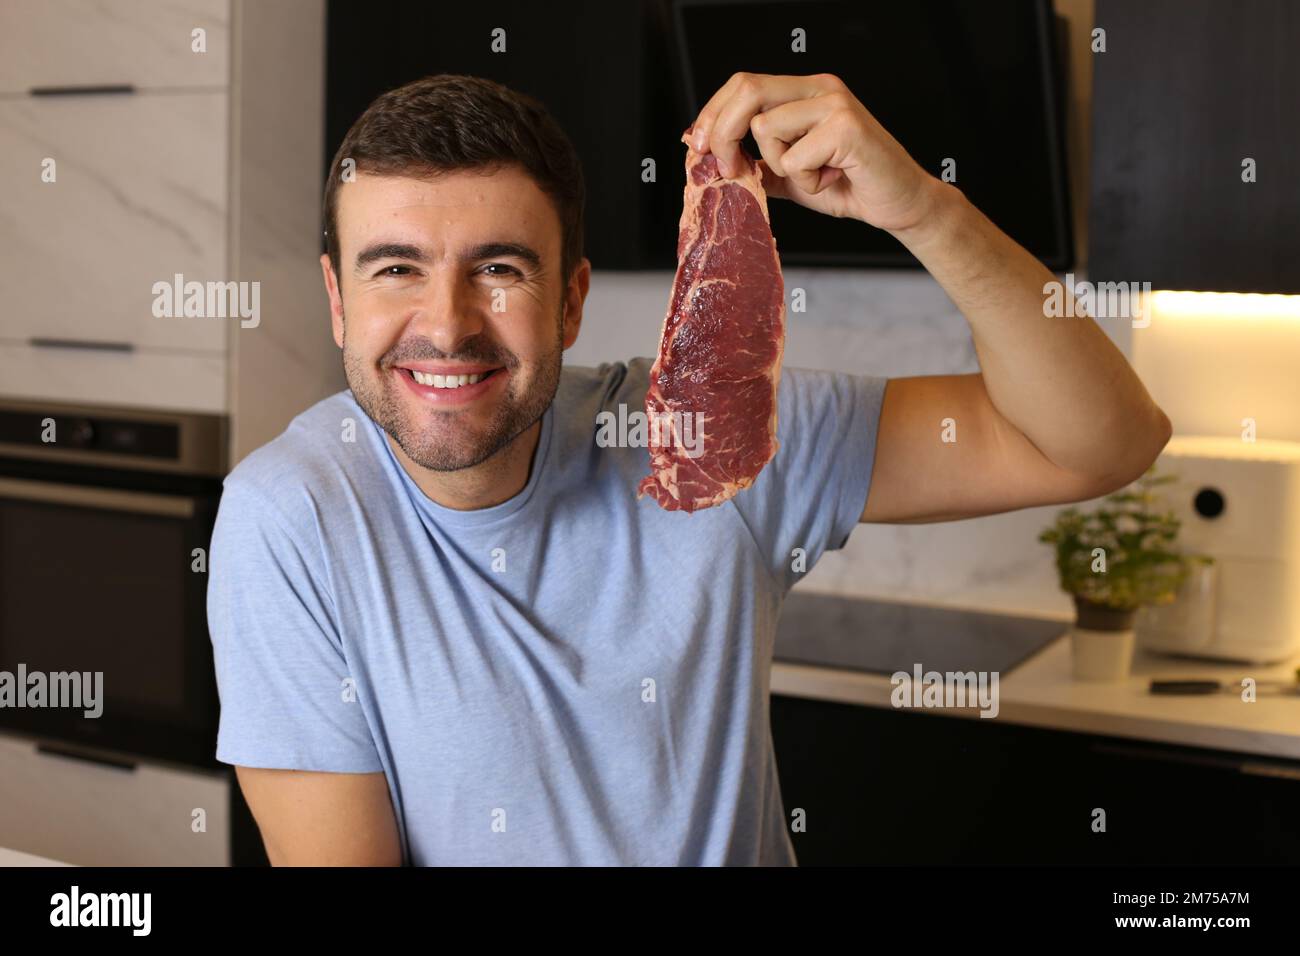 https://c8.alamy.com/comp/2M75A7M/meat-lover-showing-a-delicious-raw-steak-2M75A7M.jpg